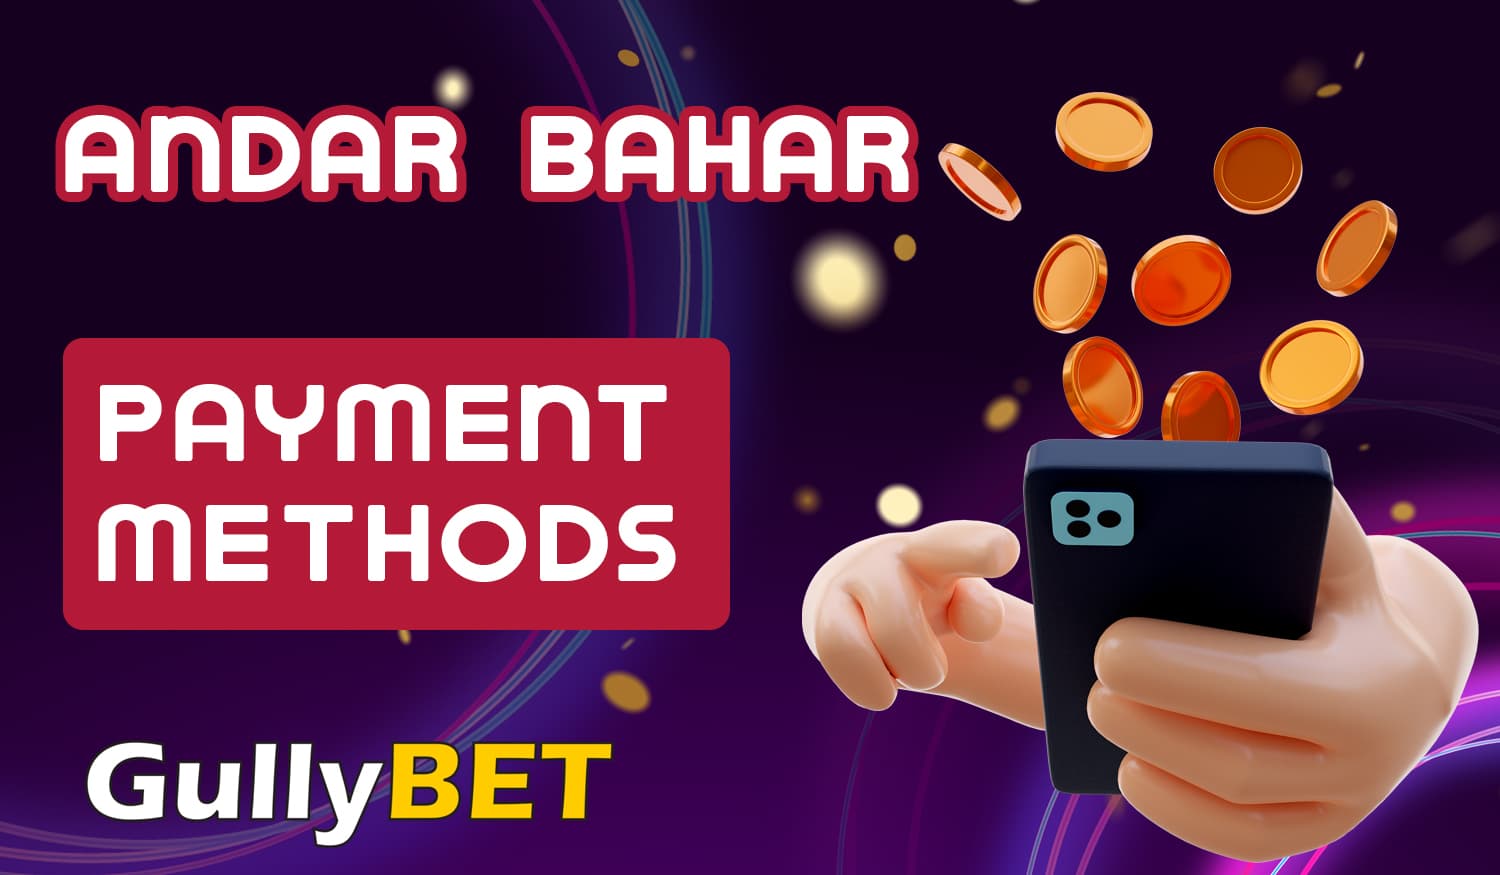 What methods can be used to deposit and withdraw from Gullybet?